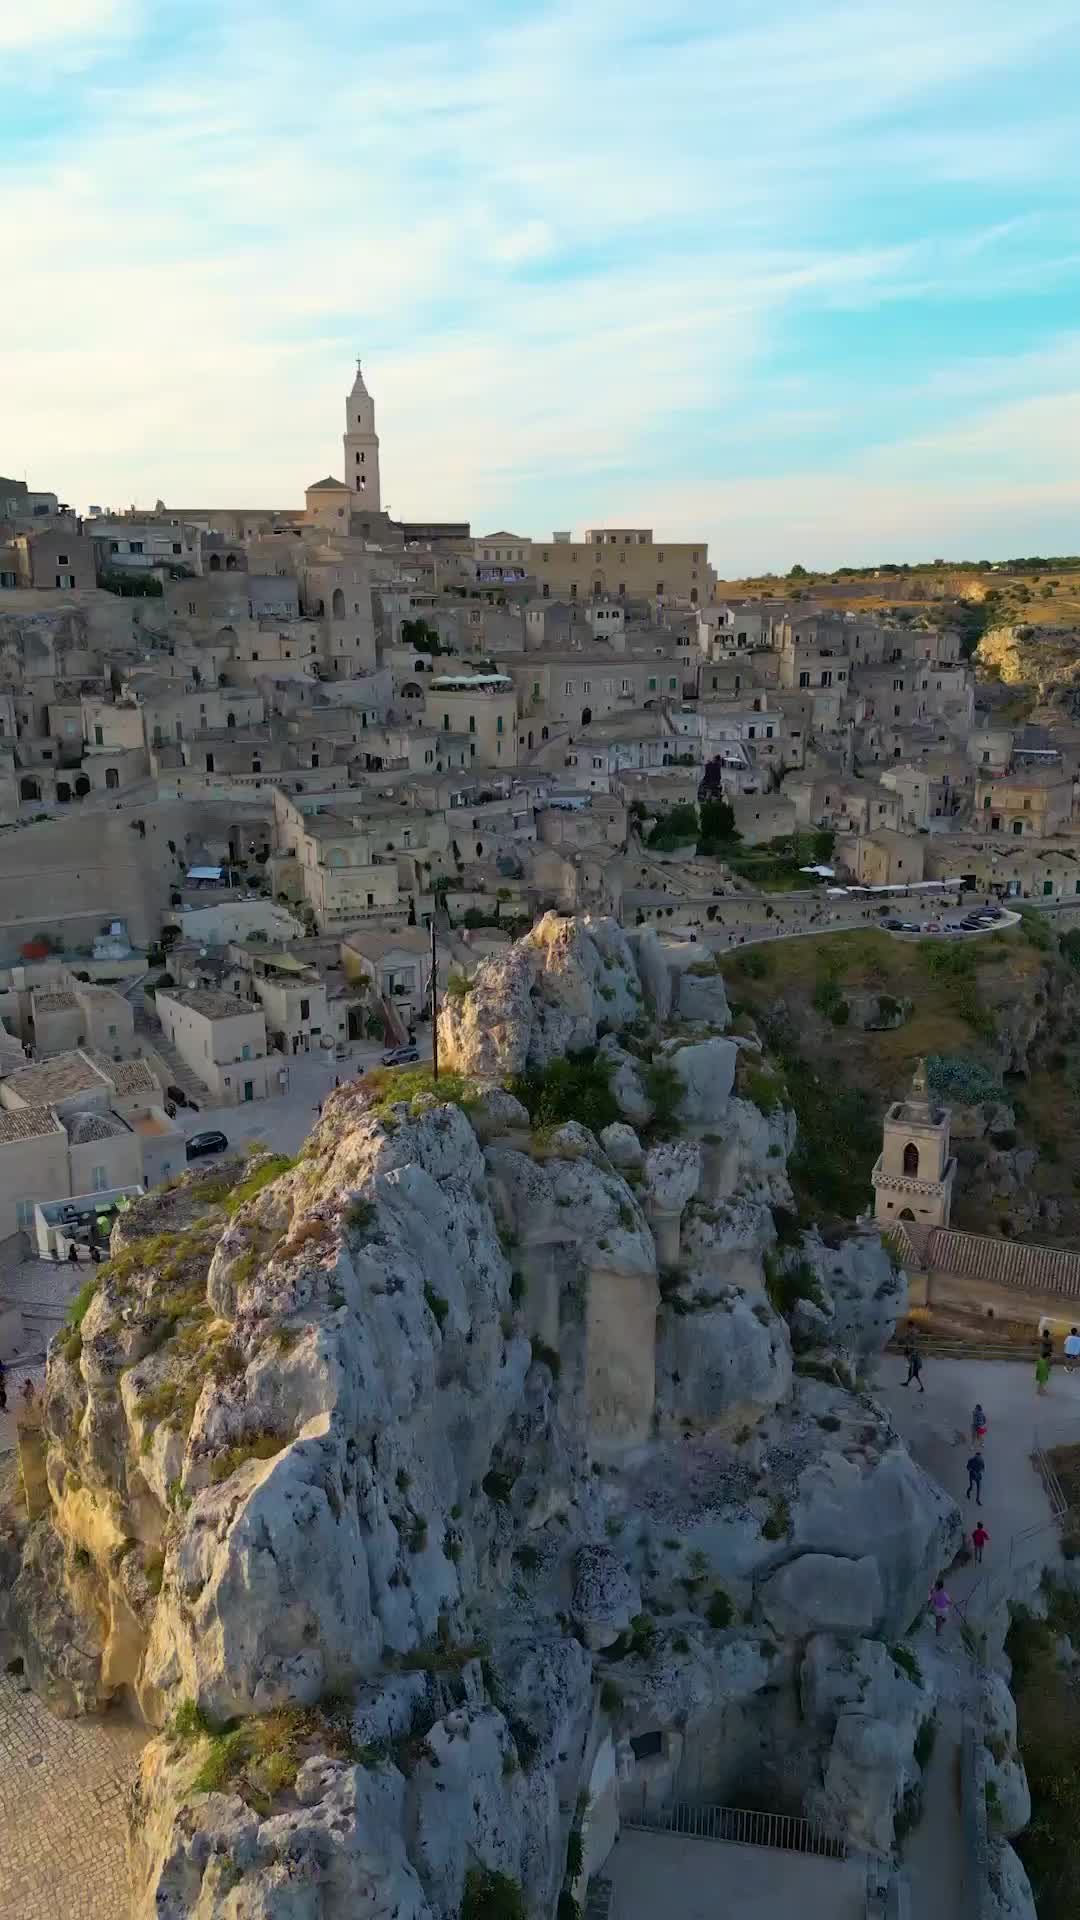 Matera's Sassi: From Abandoned to Thriving Tourist Hub